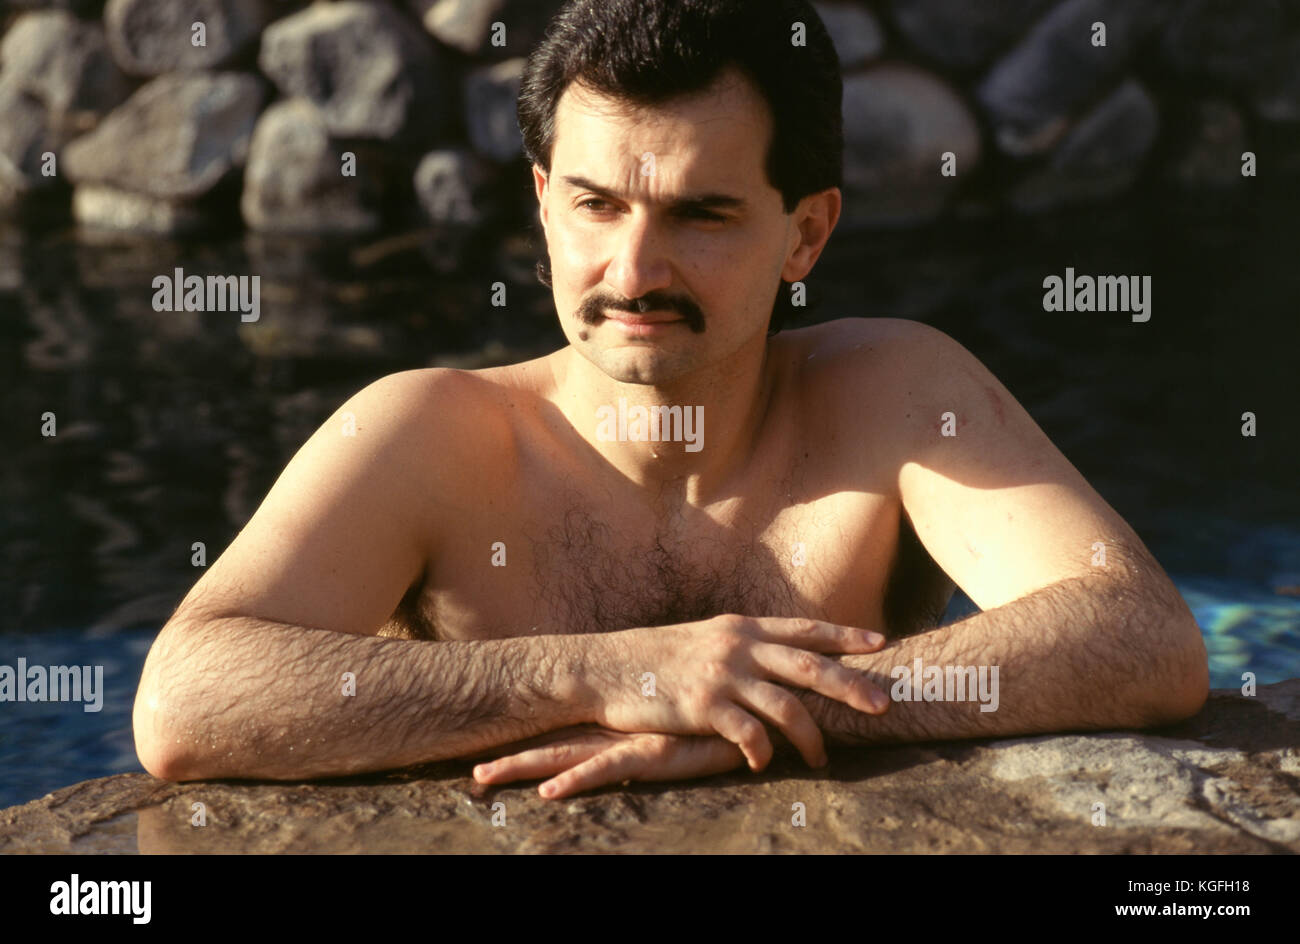 Saudi prince Al-Waleed Bin Talal bin Abdulaziz al Saud, businessman, investor and philanthropist, and member of the Saudi royal family, swimming at his palace in Riyadh in 1997.   Al-Waleed was detained November 4th, 2017 in an anti-corruption drive that included at least 10 other princes, four ministers and tens of former ministers, that sent shock waves through the kingdom and the world's major financial centers. Stock Photo